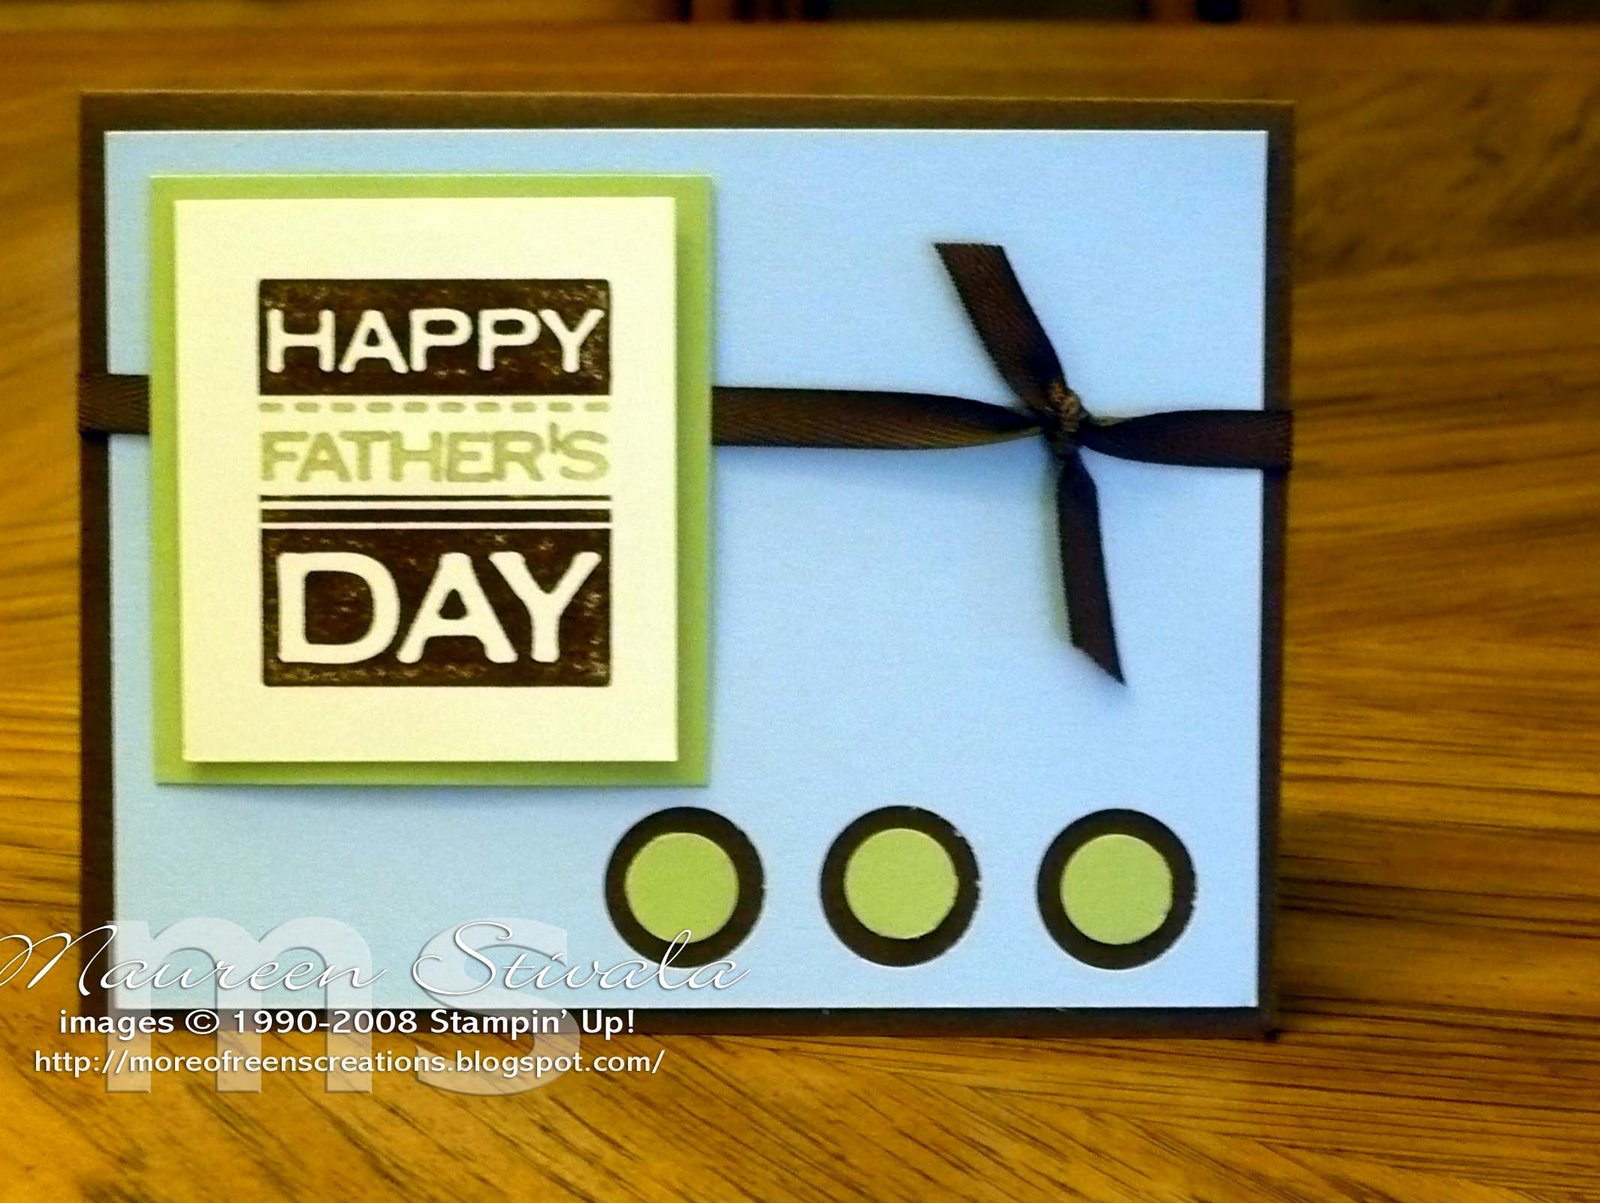 [Bobs+FAthers+day+card+from+steph.jpg]